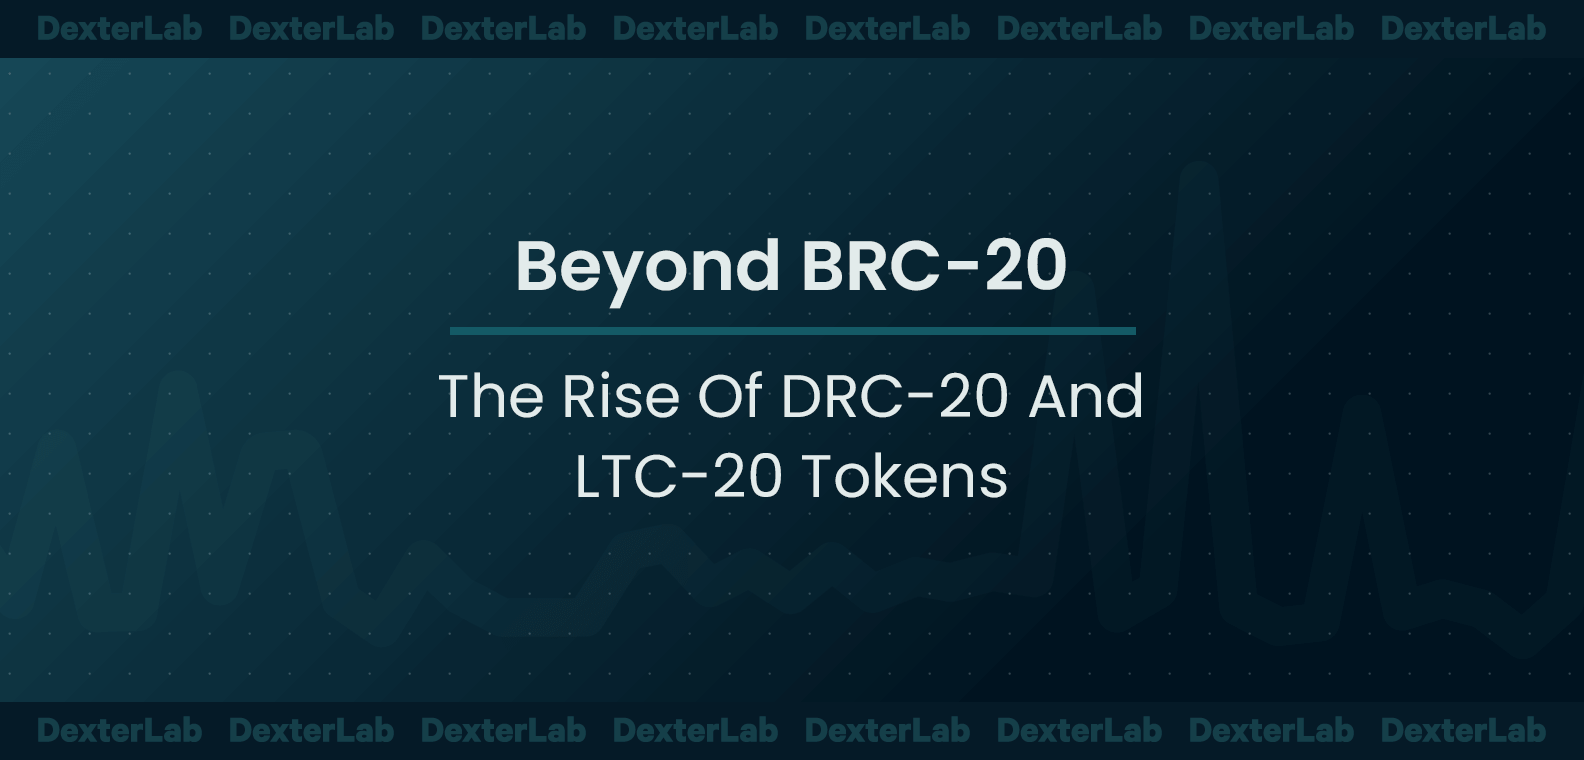 Beyond BRC-20: The Rise Of DRC-20 And LTC-20 Tokens